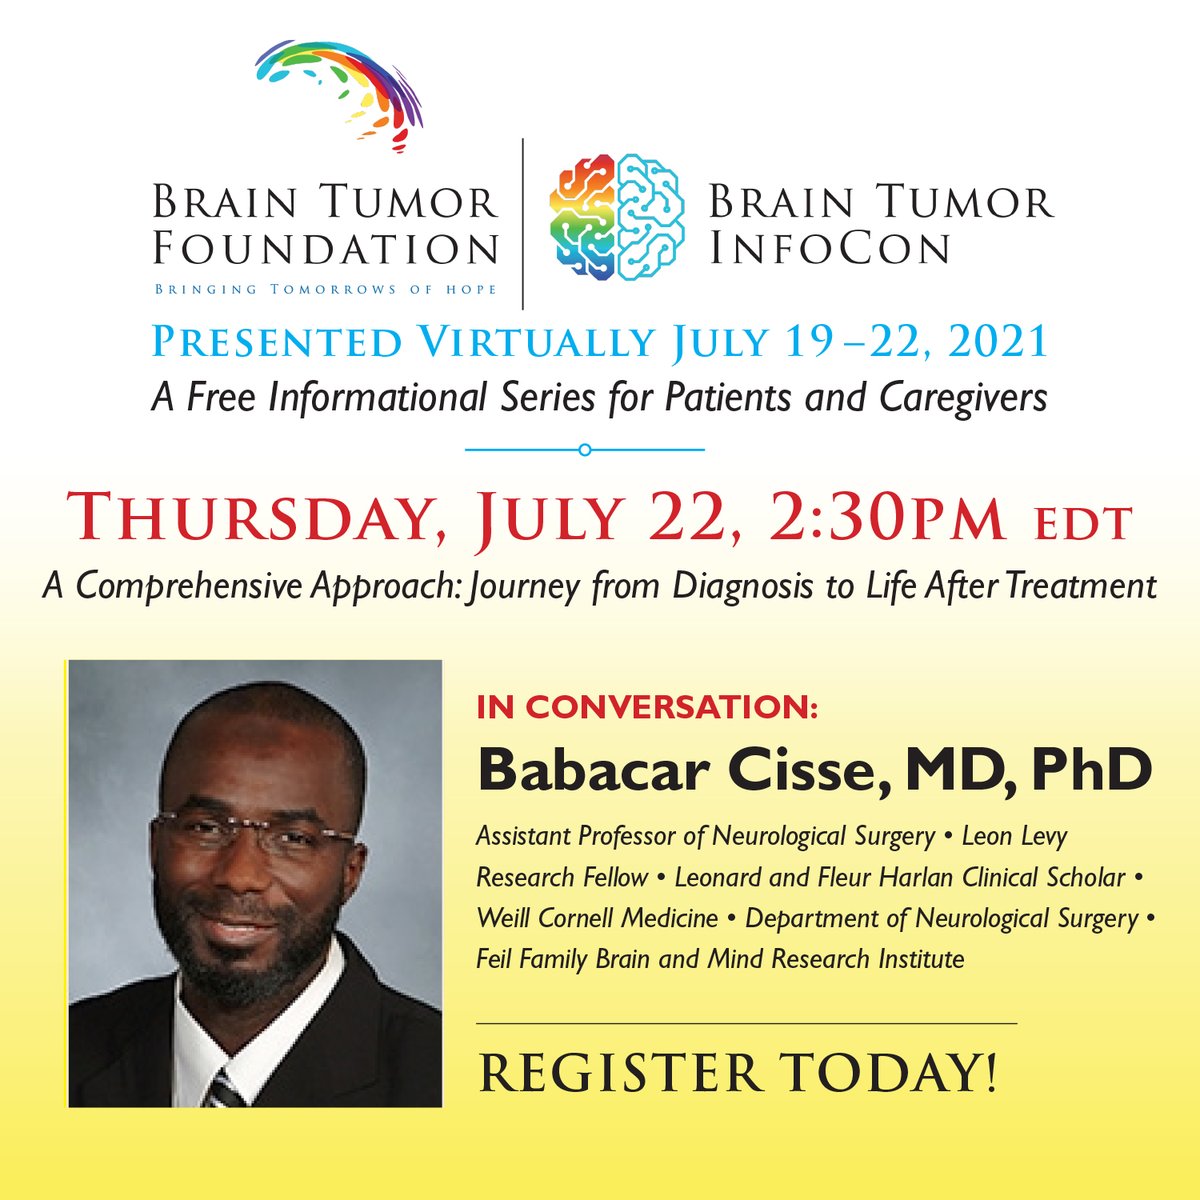 No one should feel alone when dealing with a brain tumor. Join Dr. Philip E. Stieg and Dr. Babacar Cisse as they walk you through the journey from diagnosis to life after treatment. Register now! –> bit.ly/BTFInfoCon